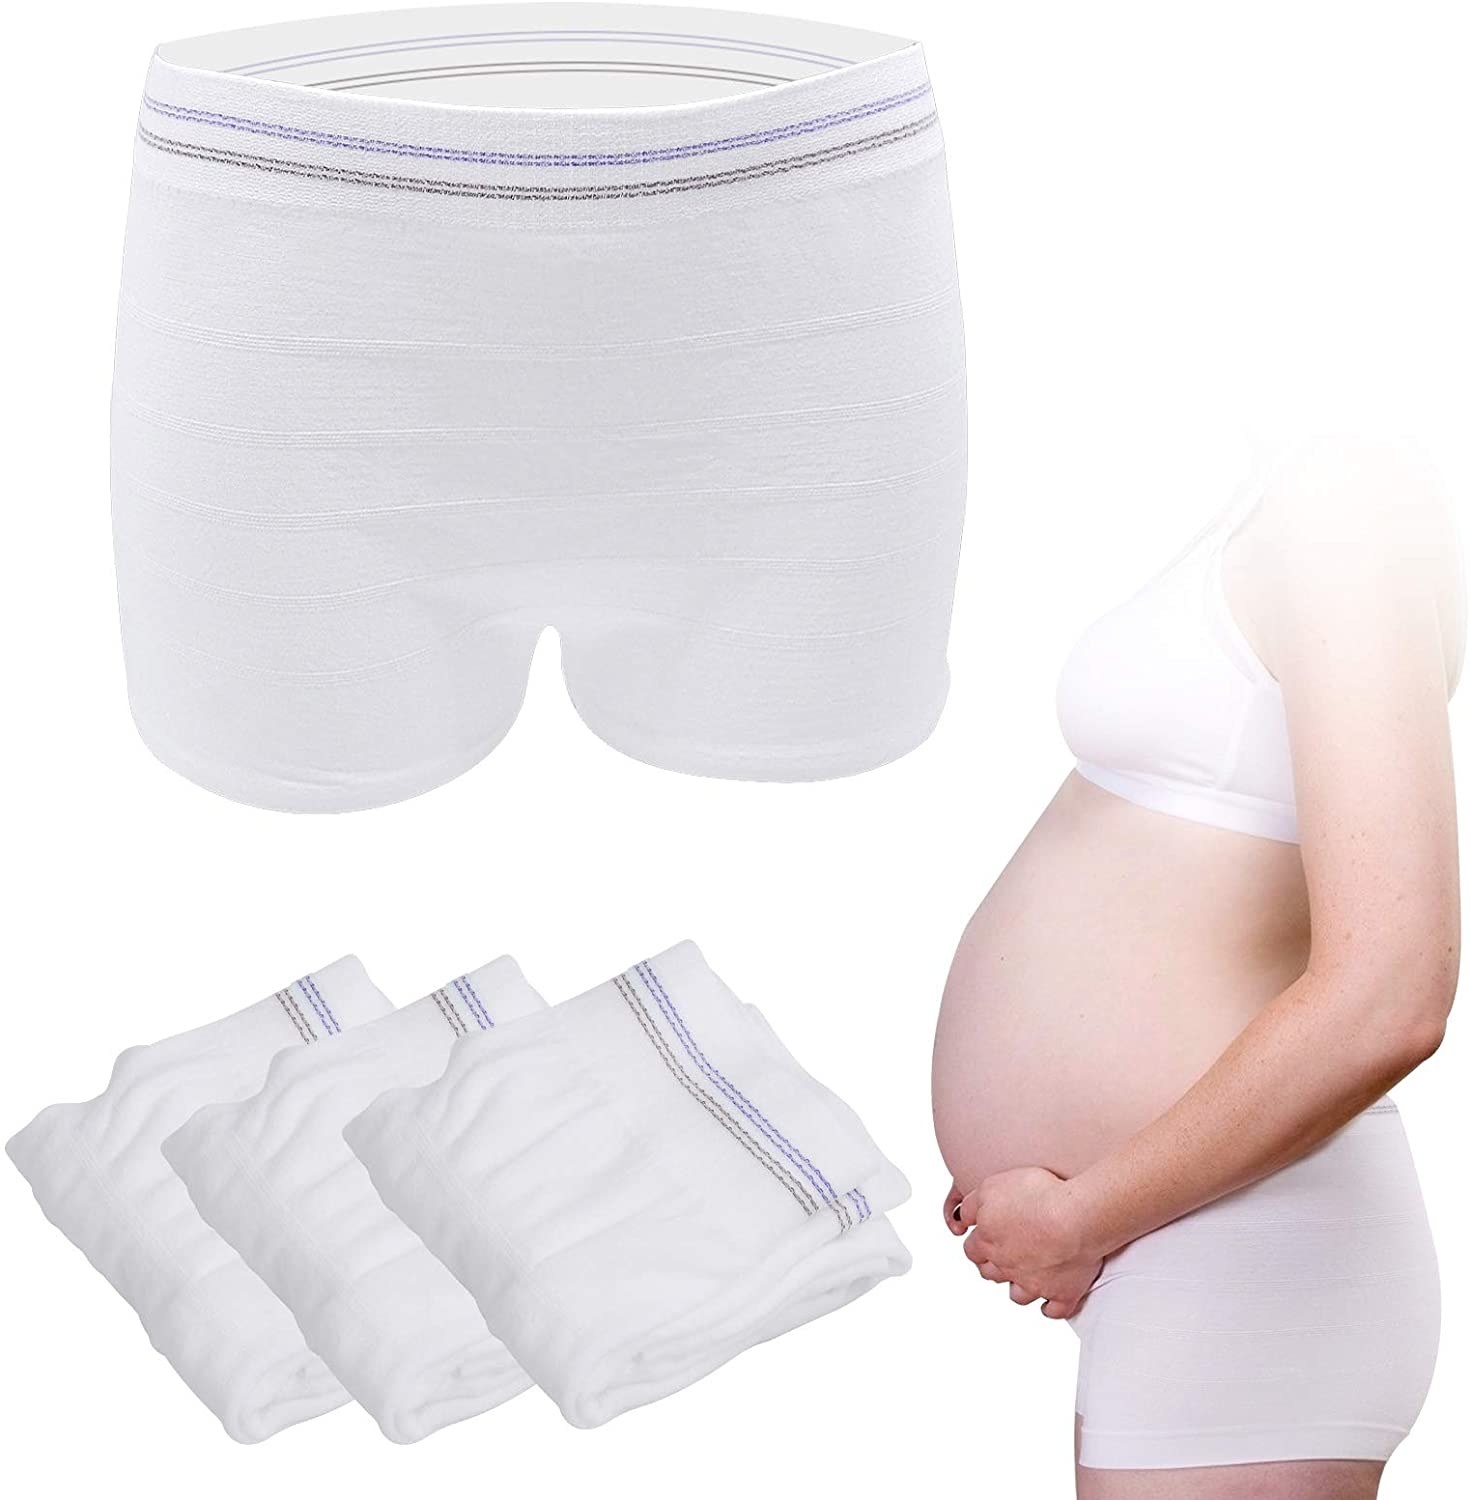 High Waist Postpartum Underwear & C-Section Recovery Maternity Panties  Women Retro Lace Cotton Thong